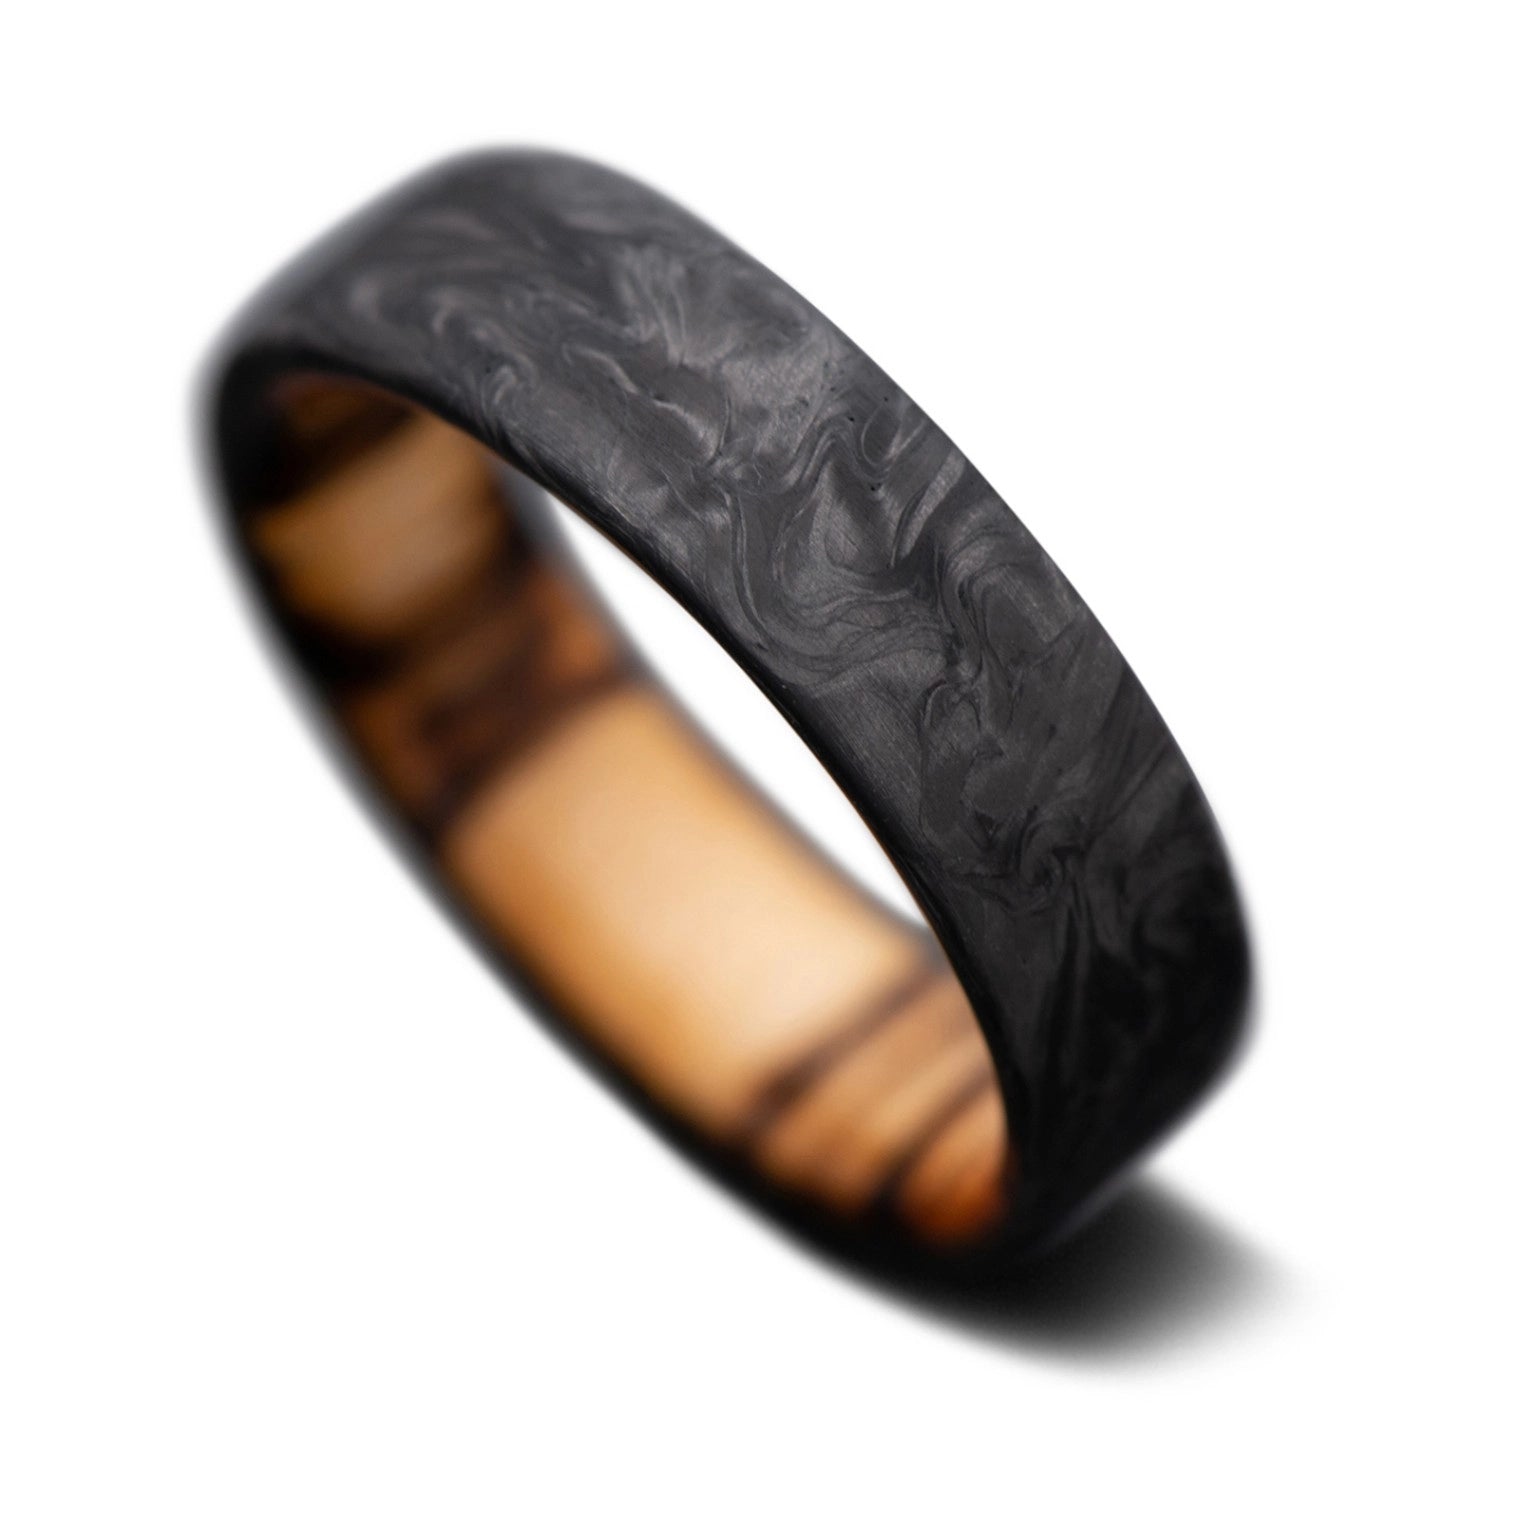 CarbonForged Core Ring with Silver Spalted Birch inner sleeve, 7mm -THE QUEST